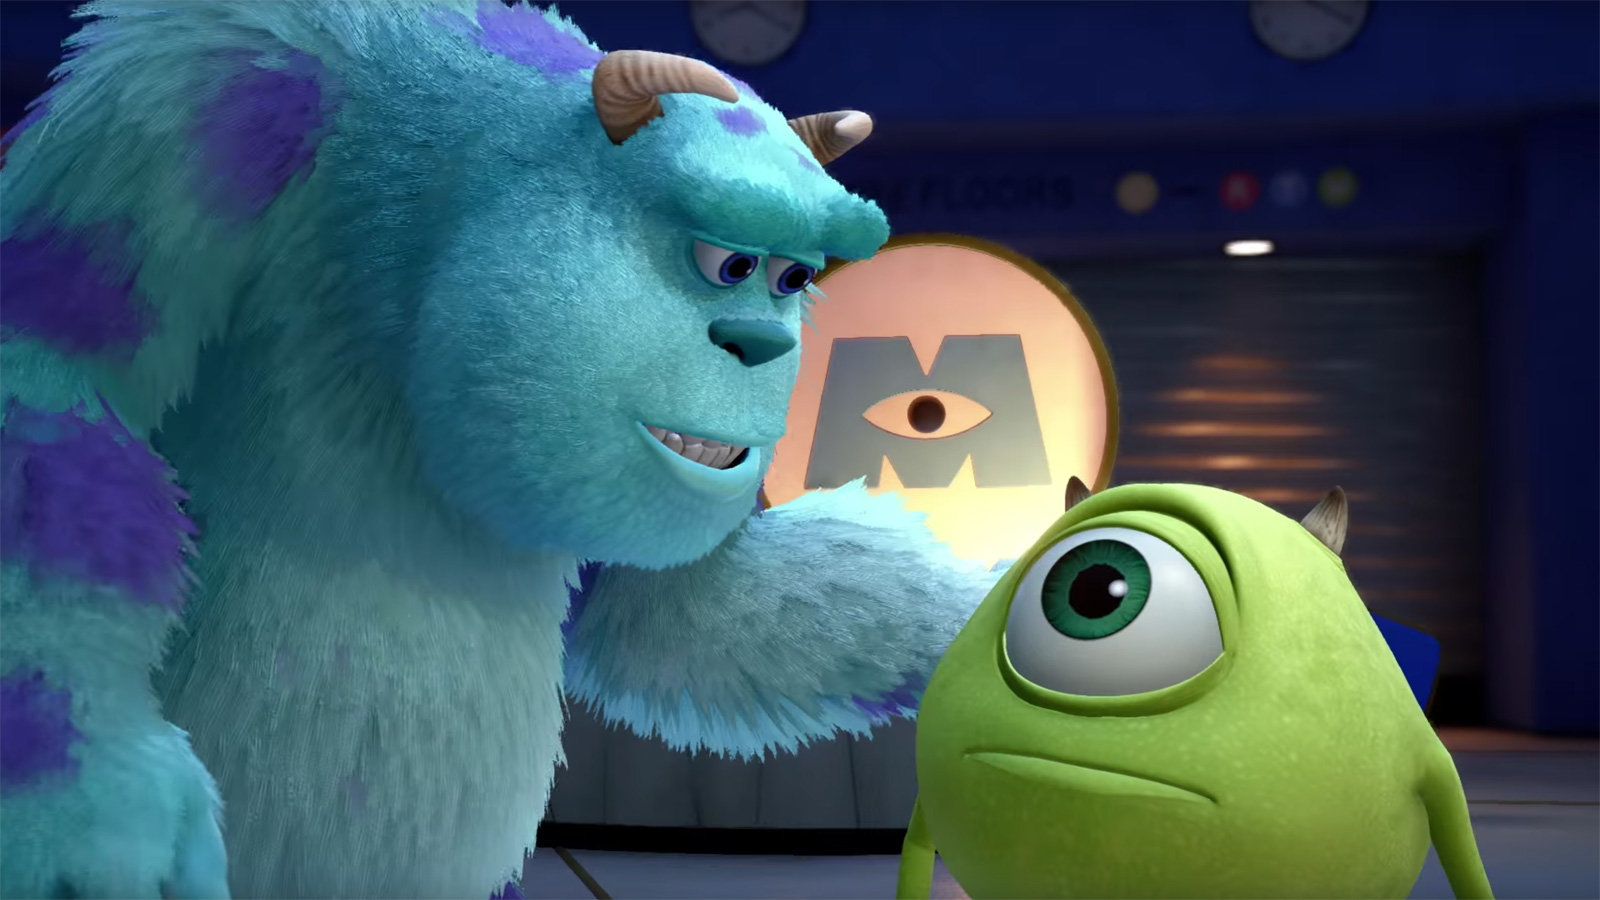 Most Disney Fans Can’t Identify More Than 15/18 of These Movie Foods – Can You? Monsters, Inc.